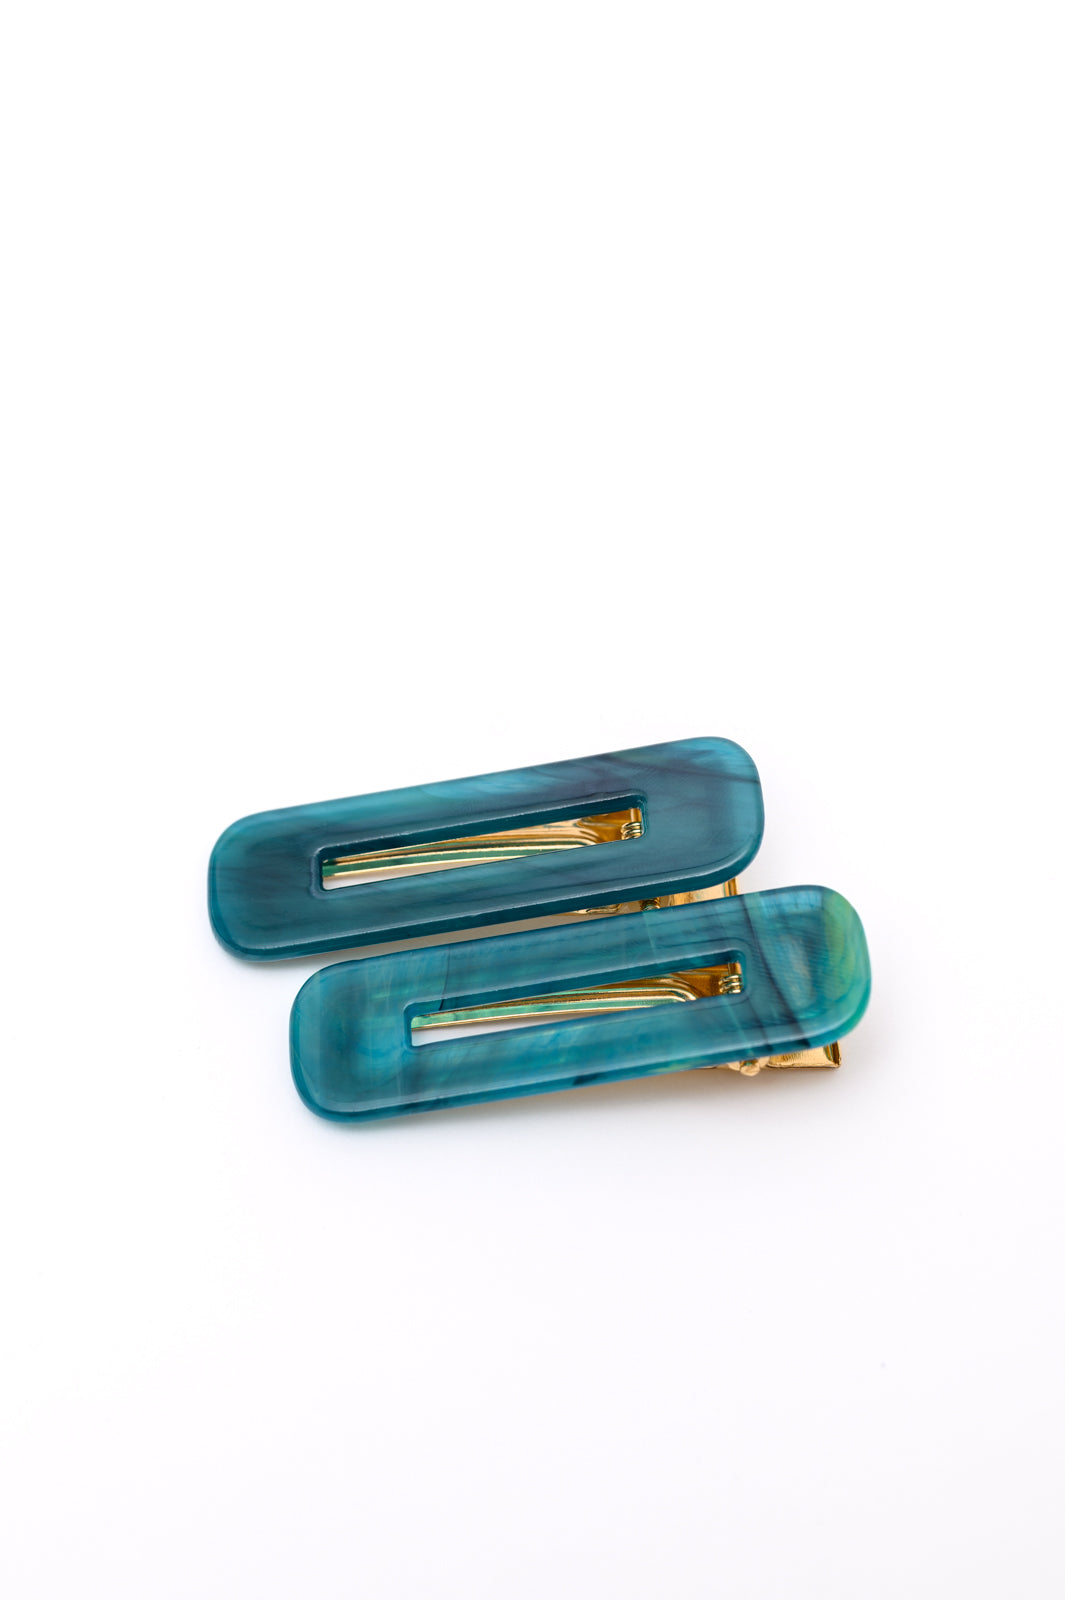 Double Trouble 2 Pack Hair Clip in Sea Blue Ave Shops